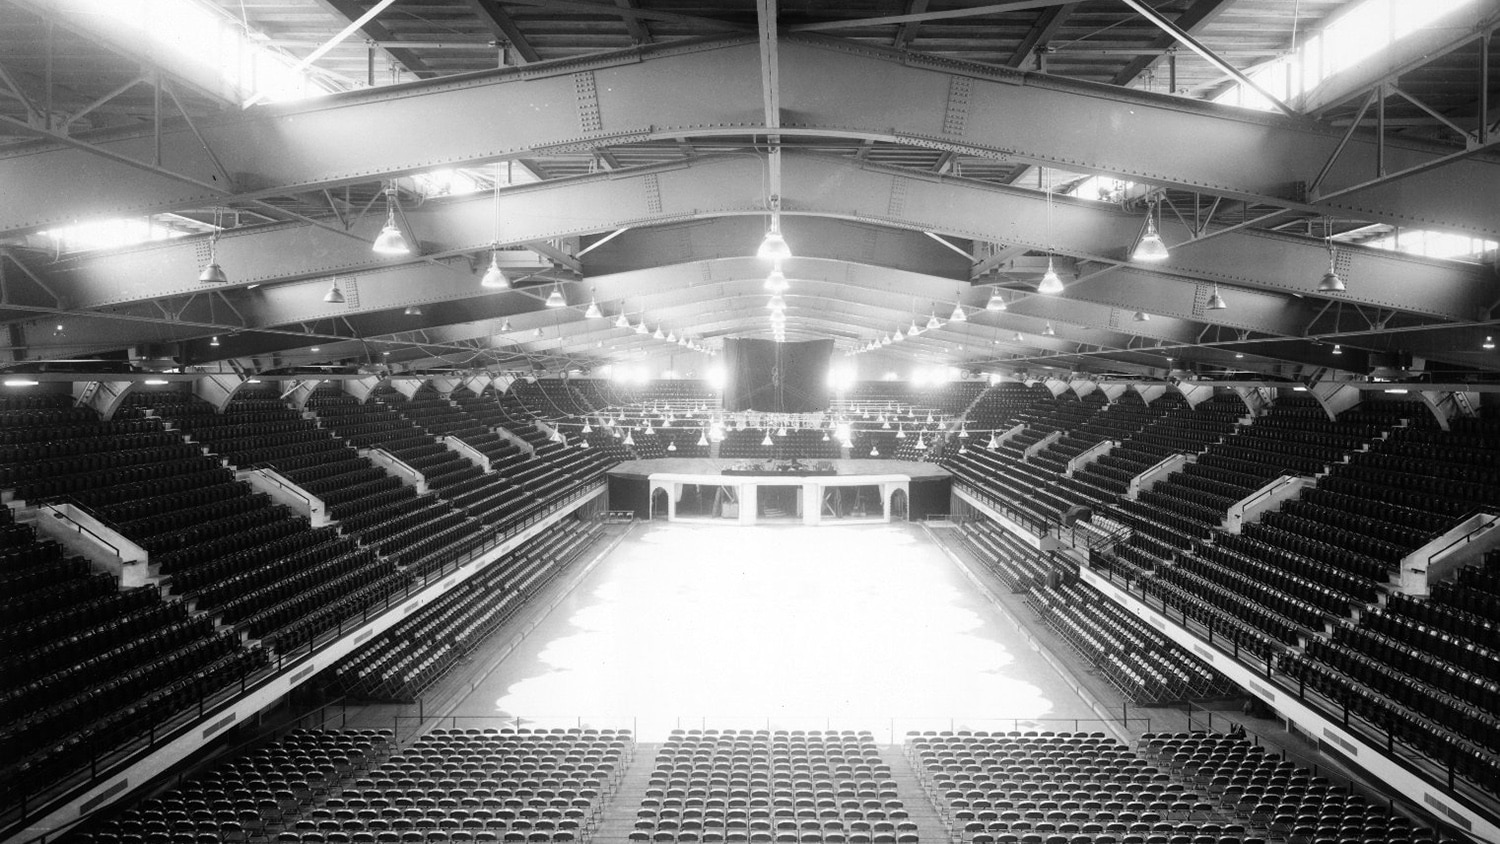 An archival photo shows ice on the floor in Reynolds Coliseum.